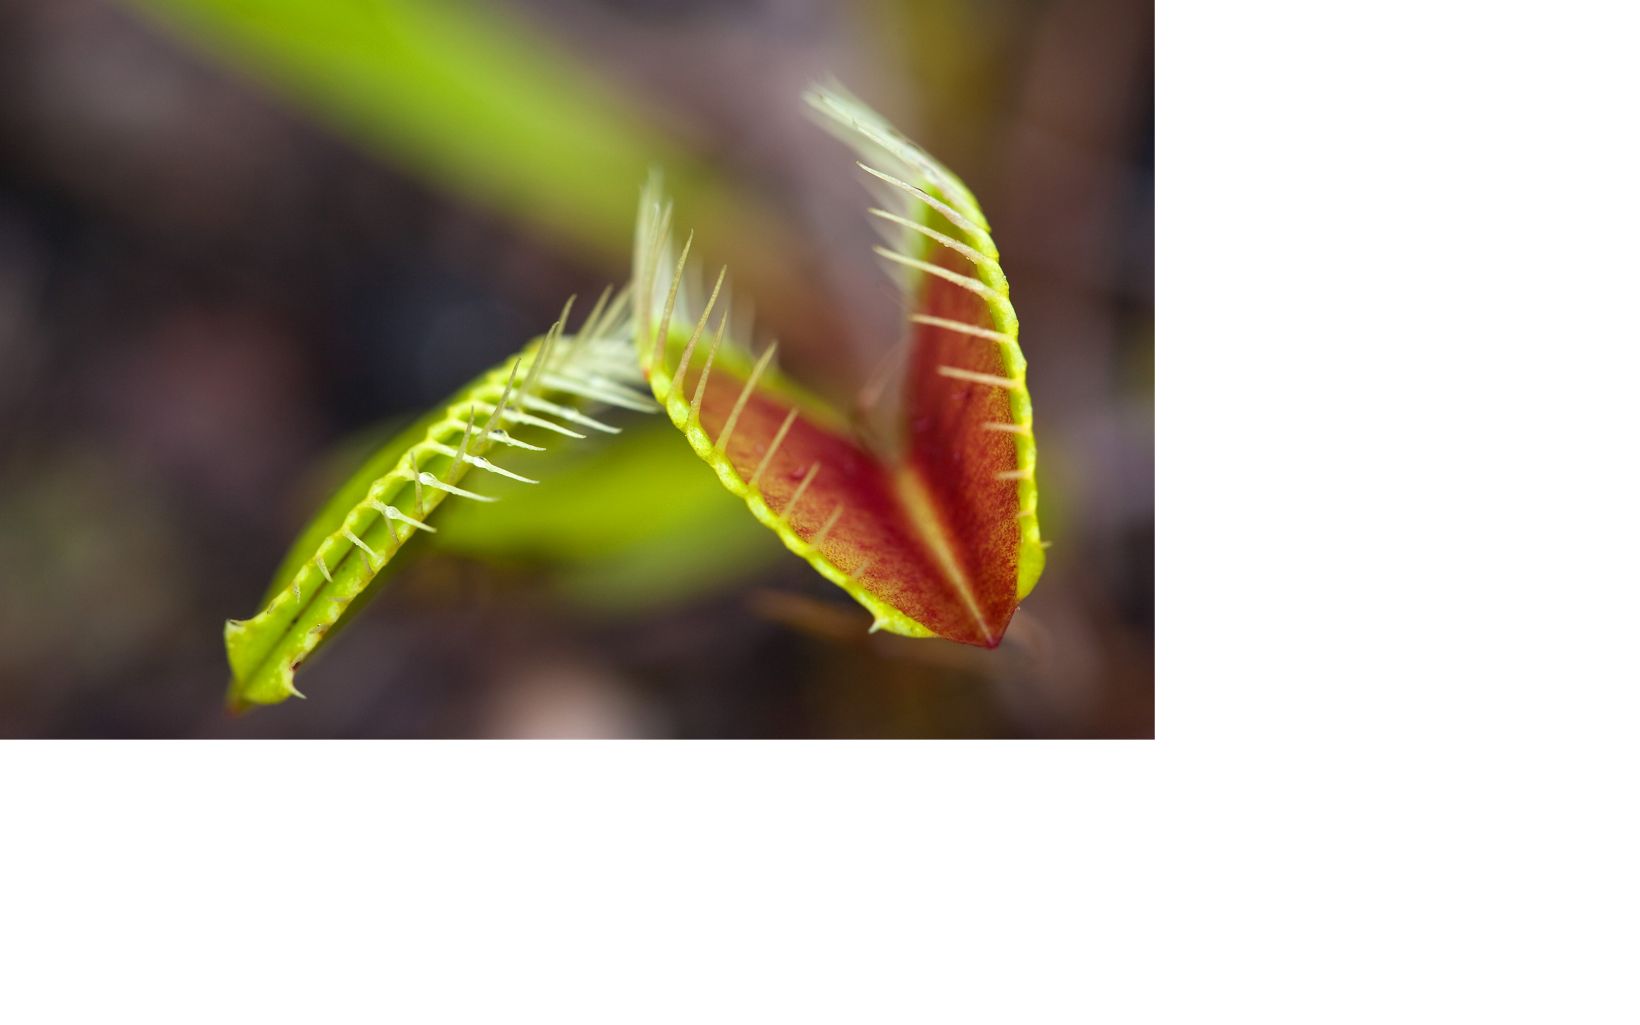 Extreme closeup of the trap leaves of a venus flytrap.